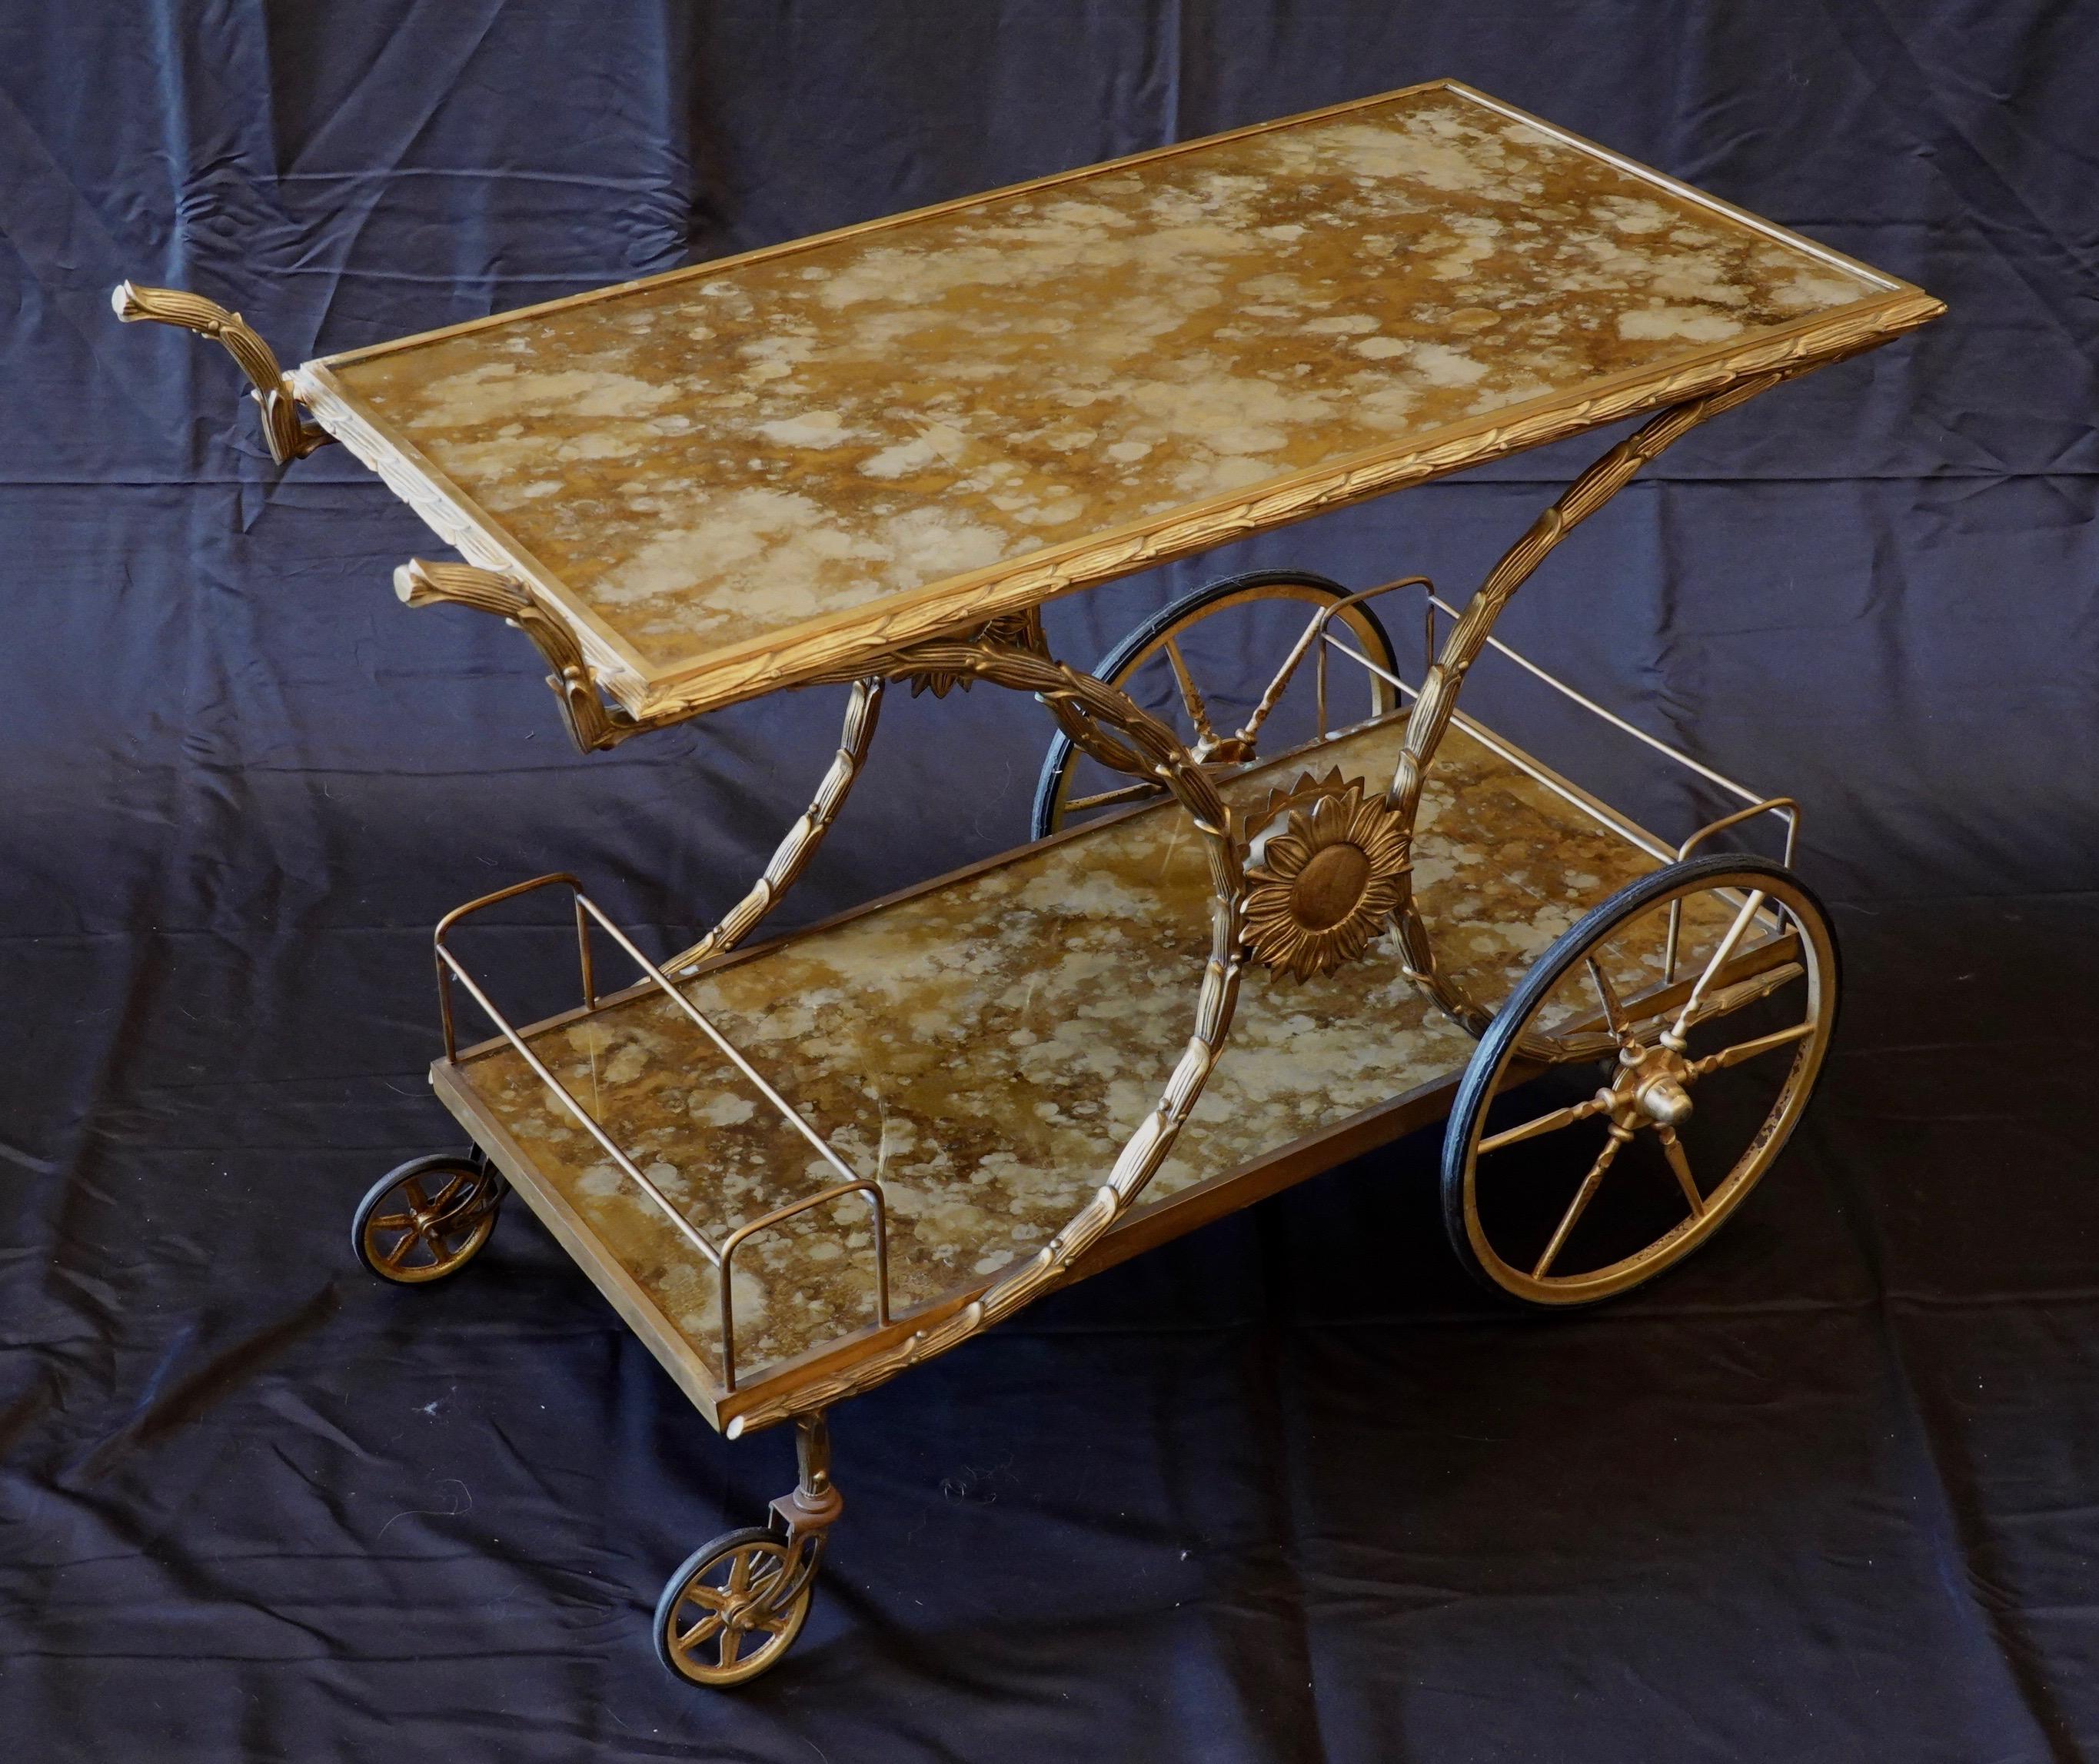 A highly-decorative and very rare French gilt-bronze bar cart with a gold églomisé tops. The bronze frame is in the form of palm leaves, and sun flowers adorn the sides where the supports come together.